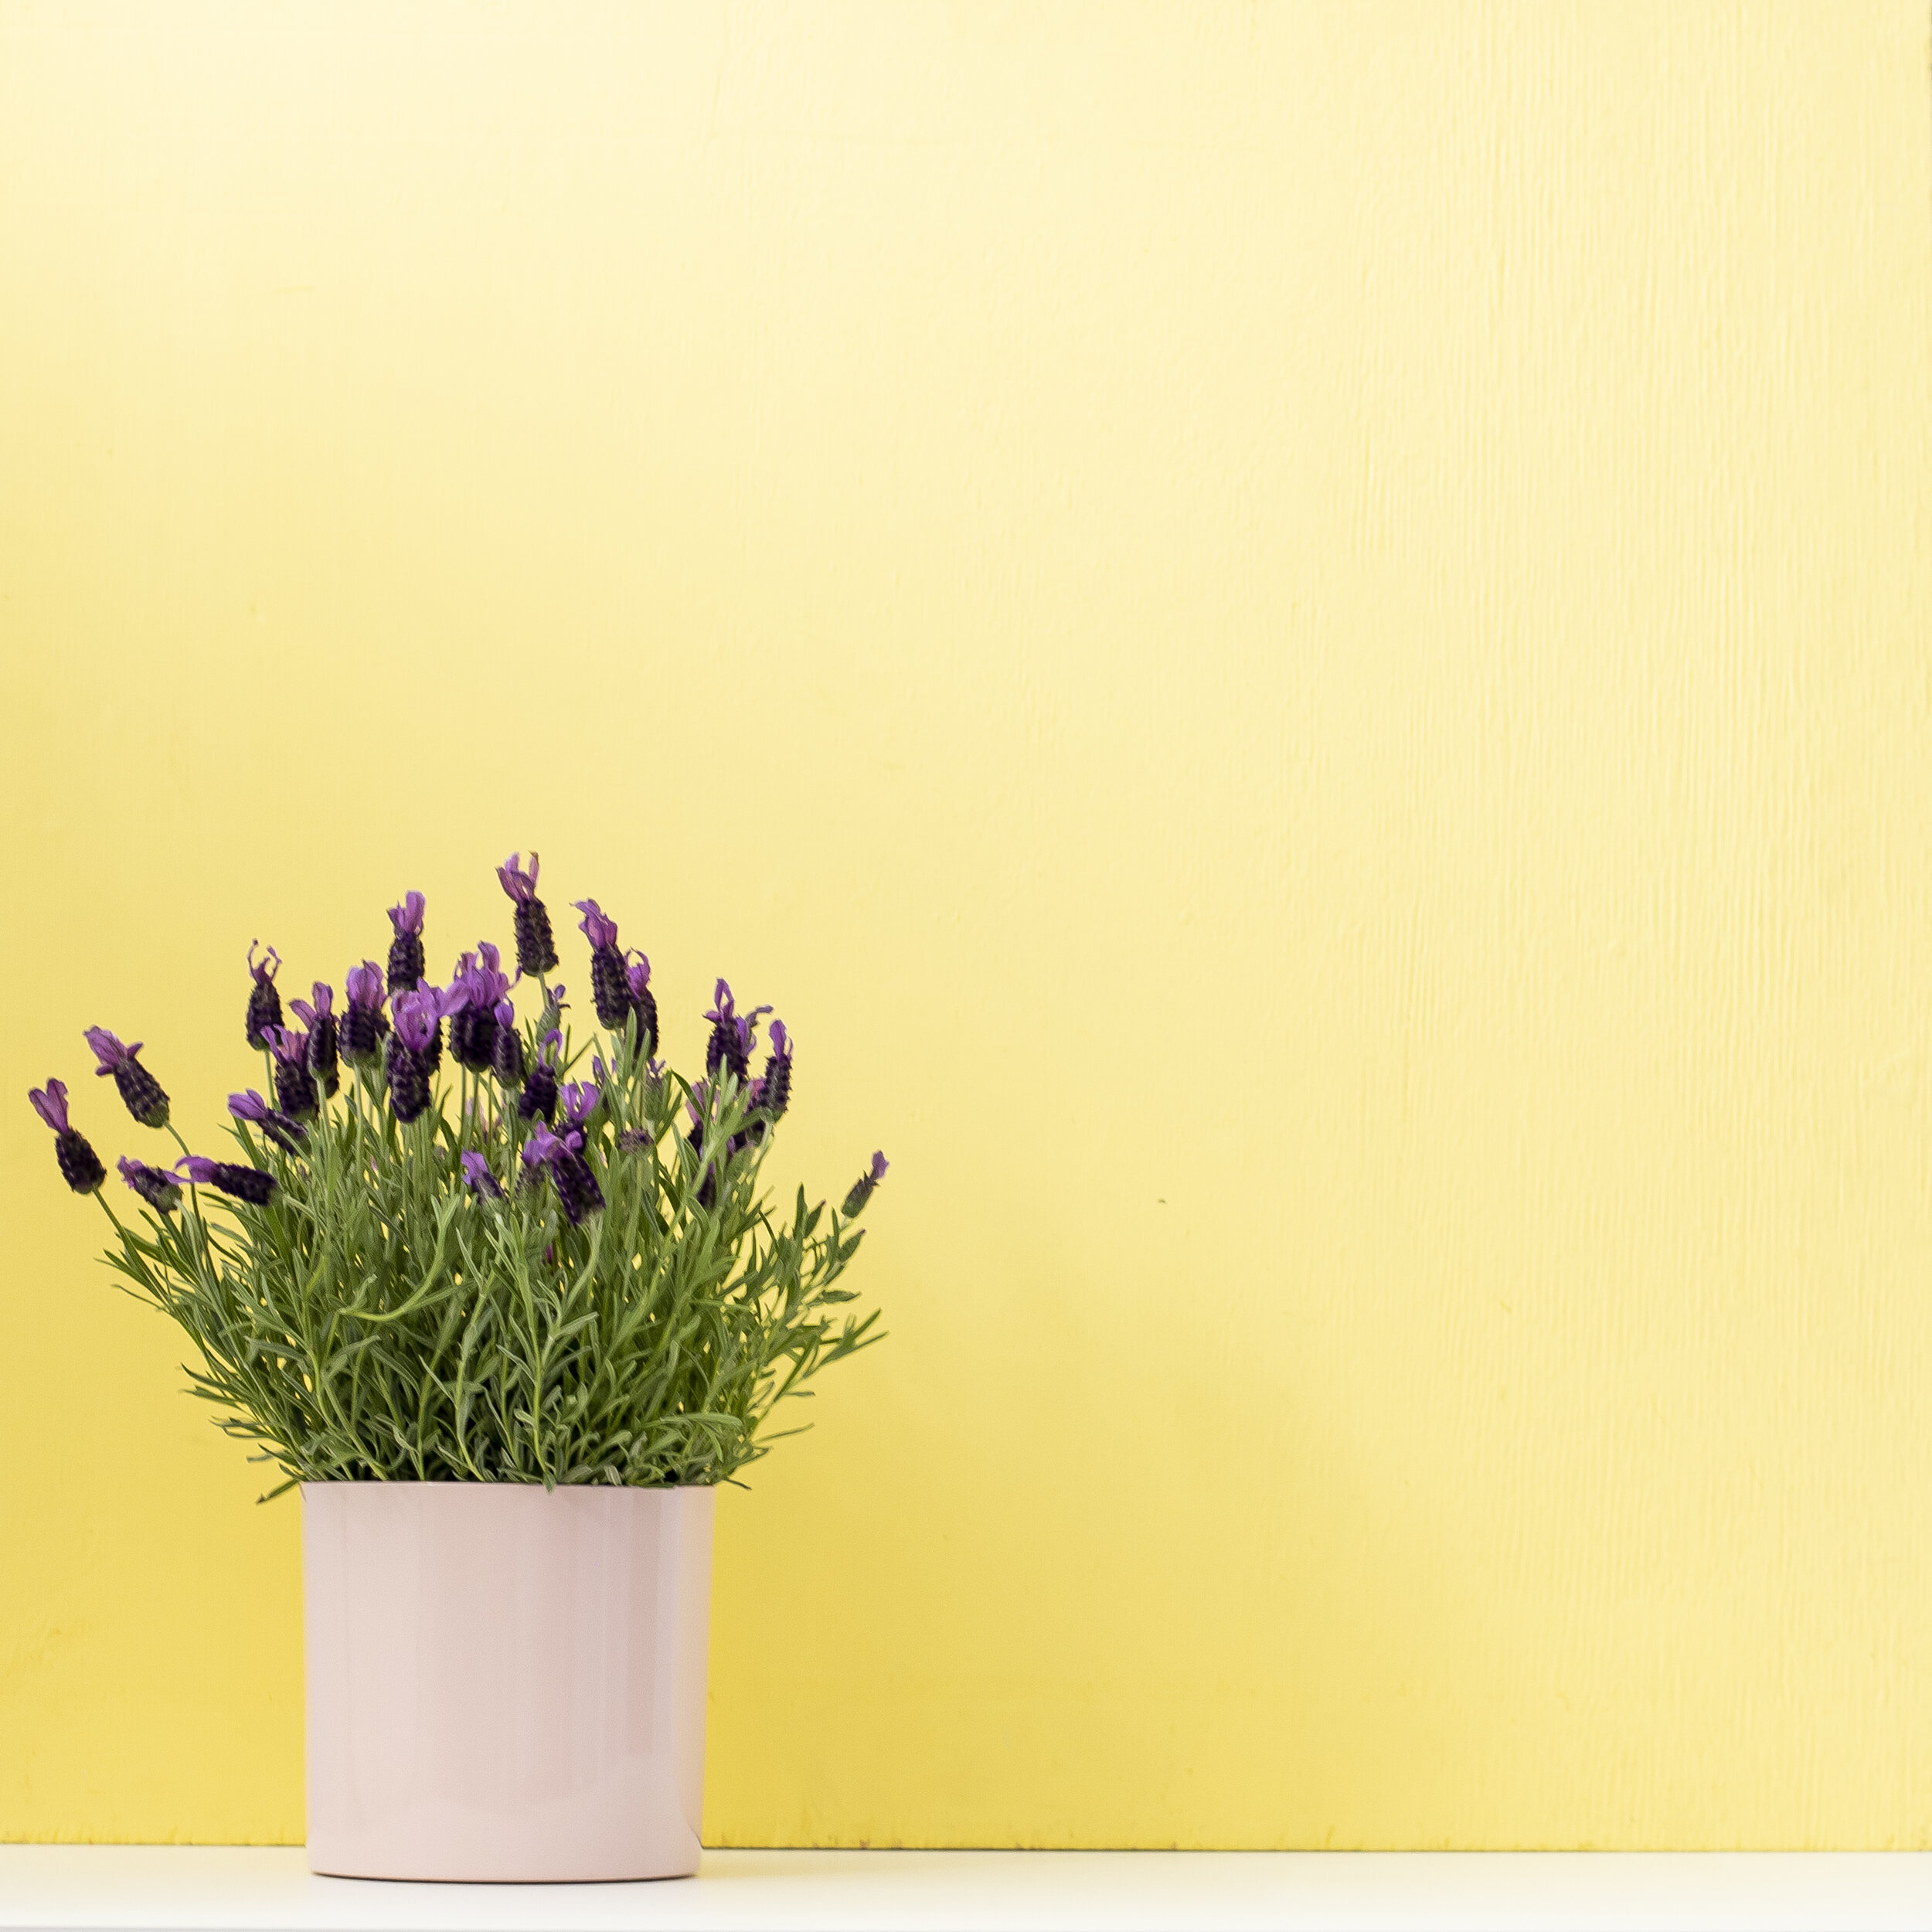 A Spanish Lavender plant in a blush colored pot sitting in front of a yellow background